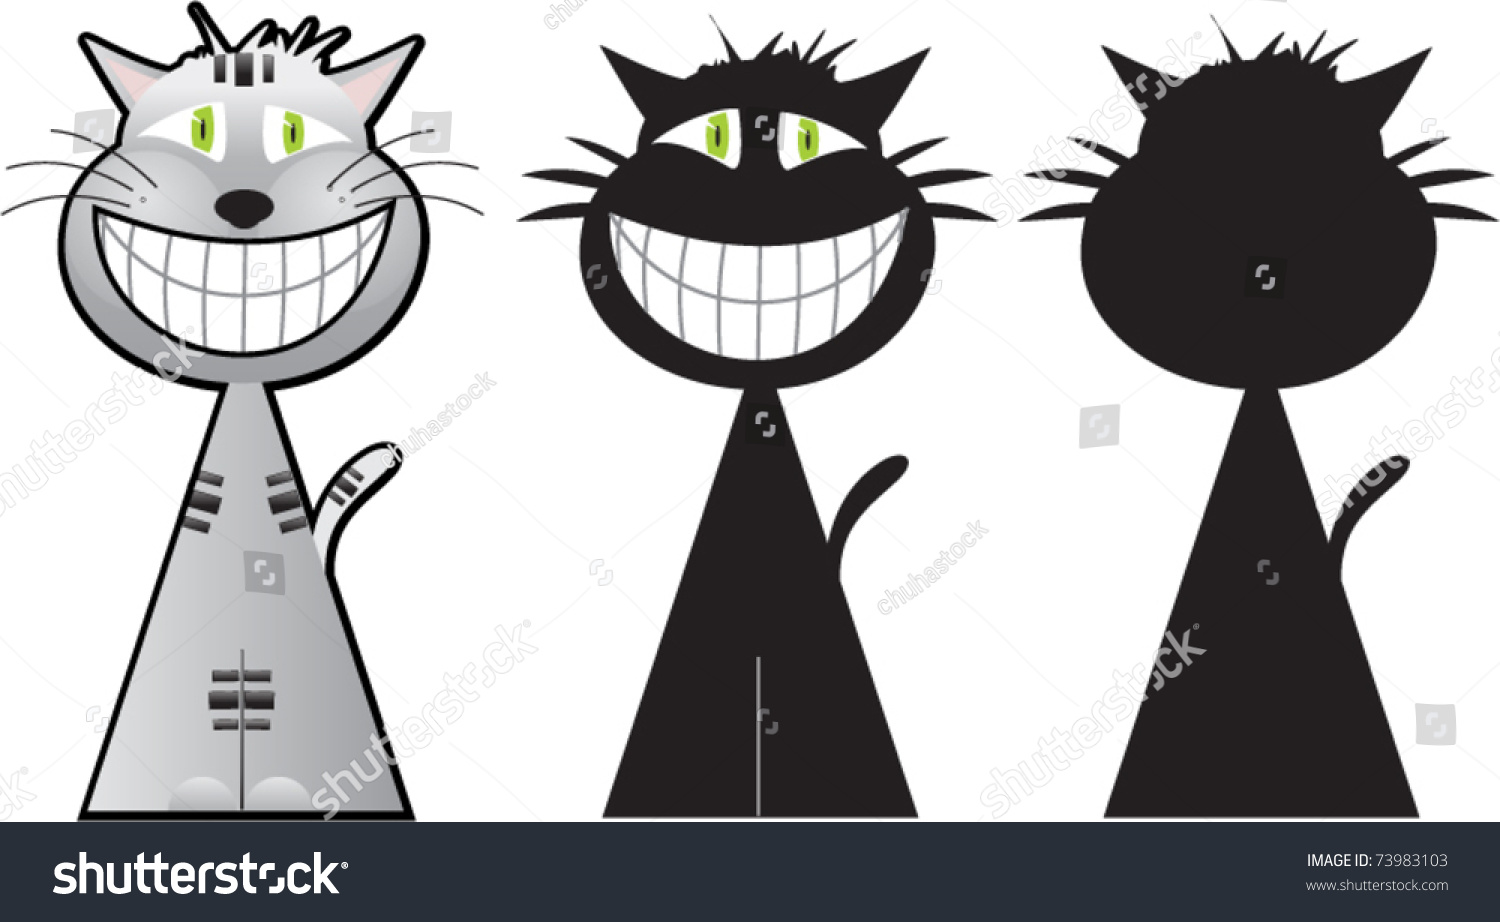 SVG of Cheshire cat illustration in cartoon style in three options svg